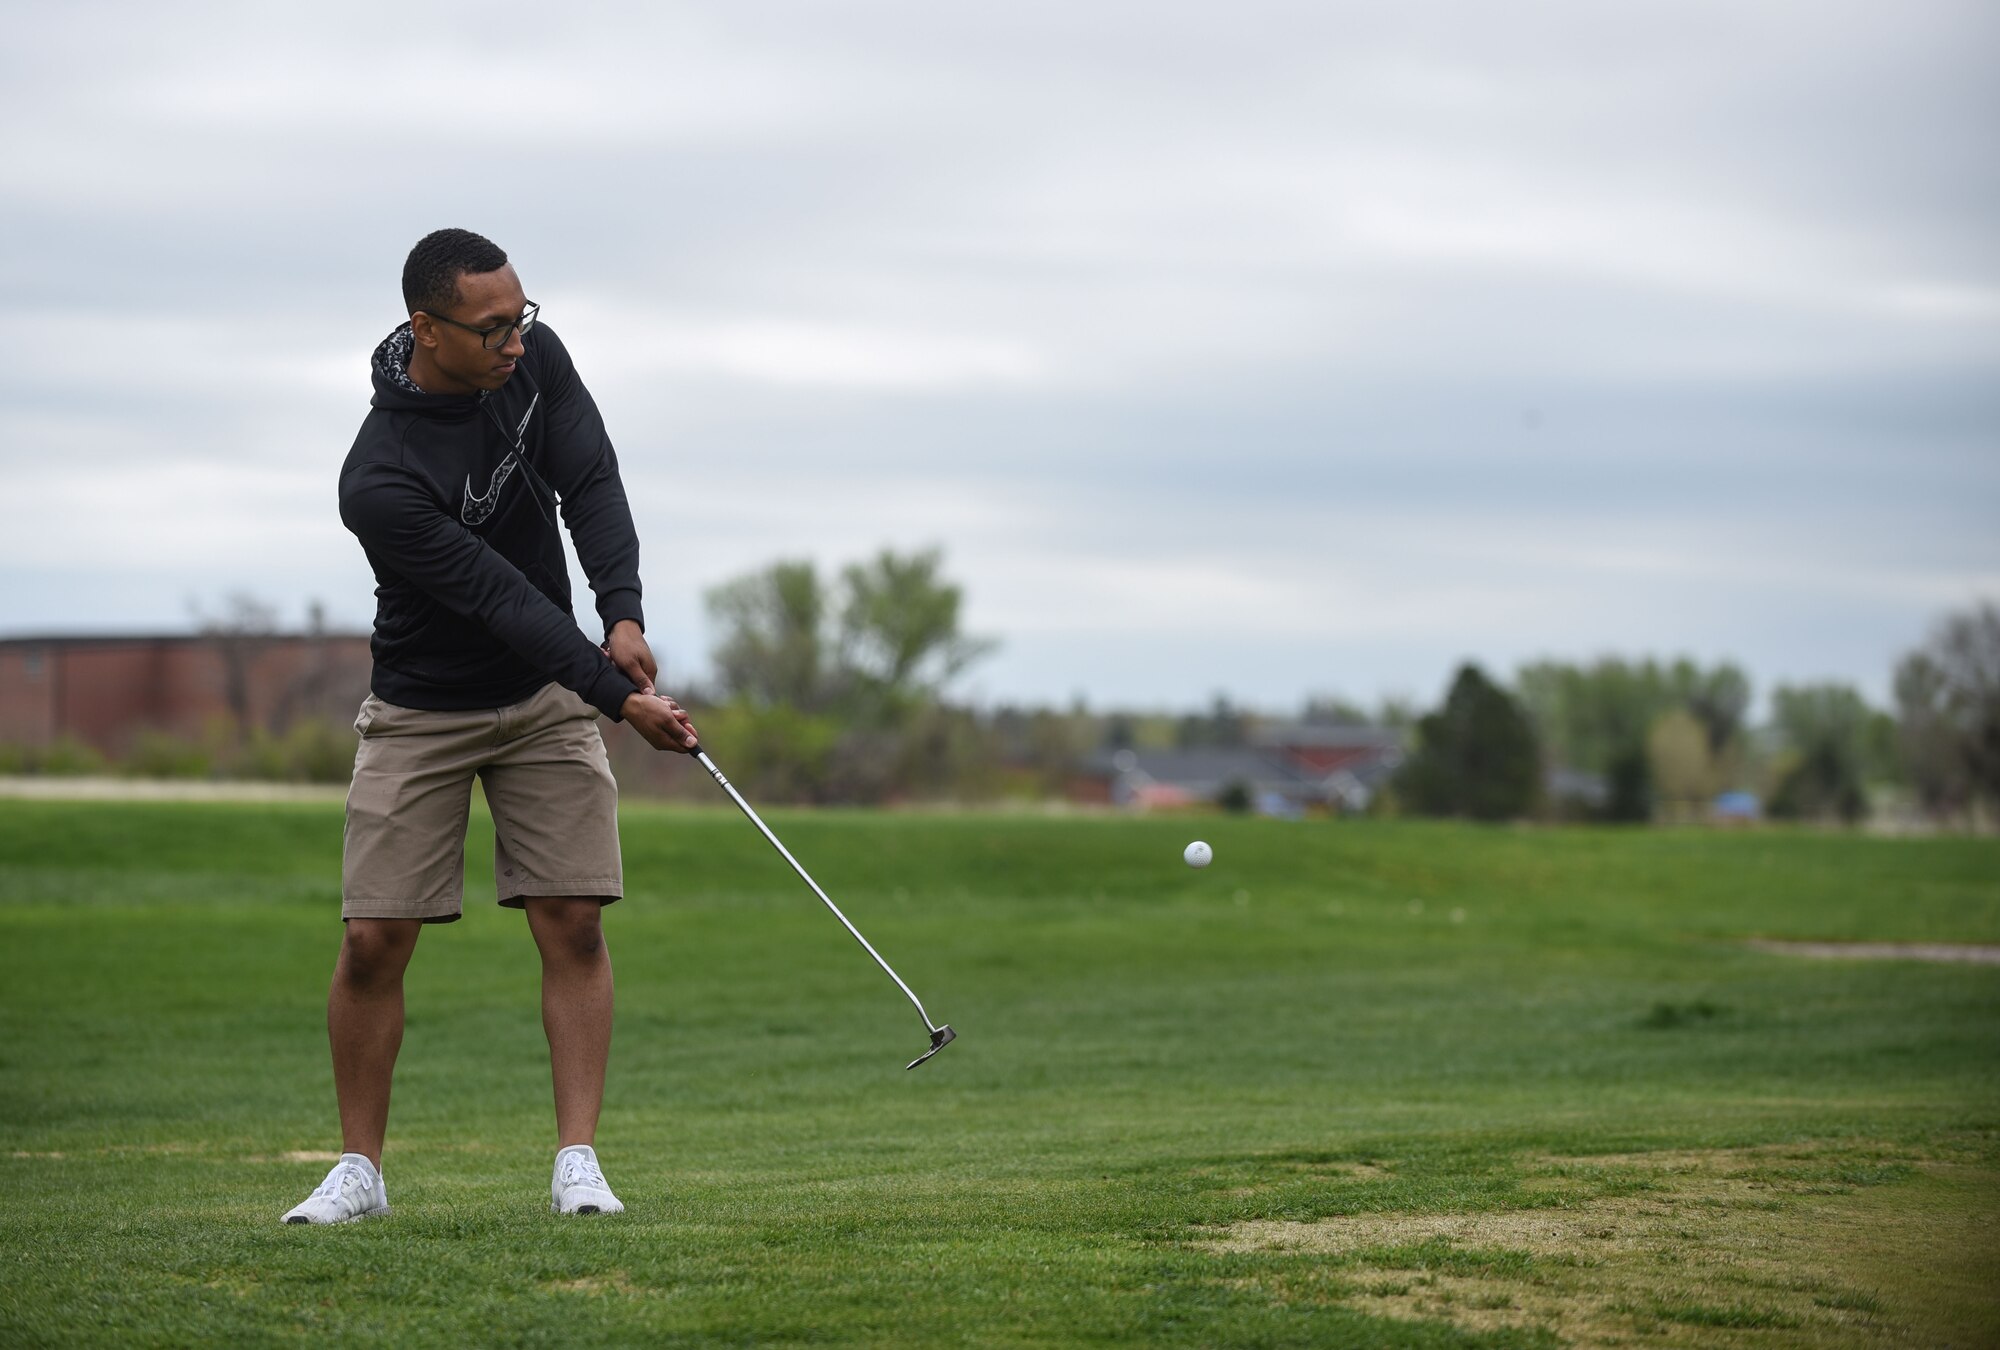 Senior Airman Samuel Ward, 90th Security Support Squadron unmanned aerial system pilot, putts during the Police Week Security Force golf tournament, May 18, 2018, on F.E. Warren Air Force Base, Wyo. Teams came out for a relaxed round of golf to end Police Week with a good time. In 1962, President John F. Kennedy signed a proclamation which designated May 15 as Peace Officers Memorial Day and the week in which that date falls as Police Week. People all across the United States participate in various events which honor those who have paid the ultimate sacrifice. (U.S. Air Force photo by Airman 1st Class Braydon Williams)